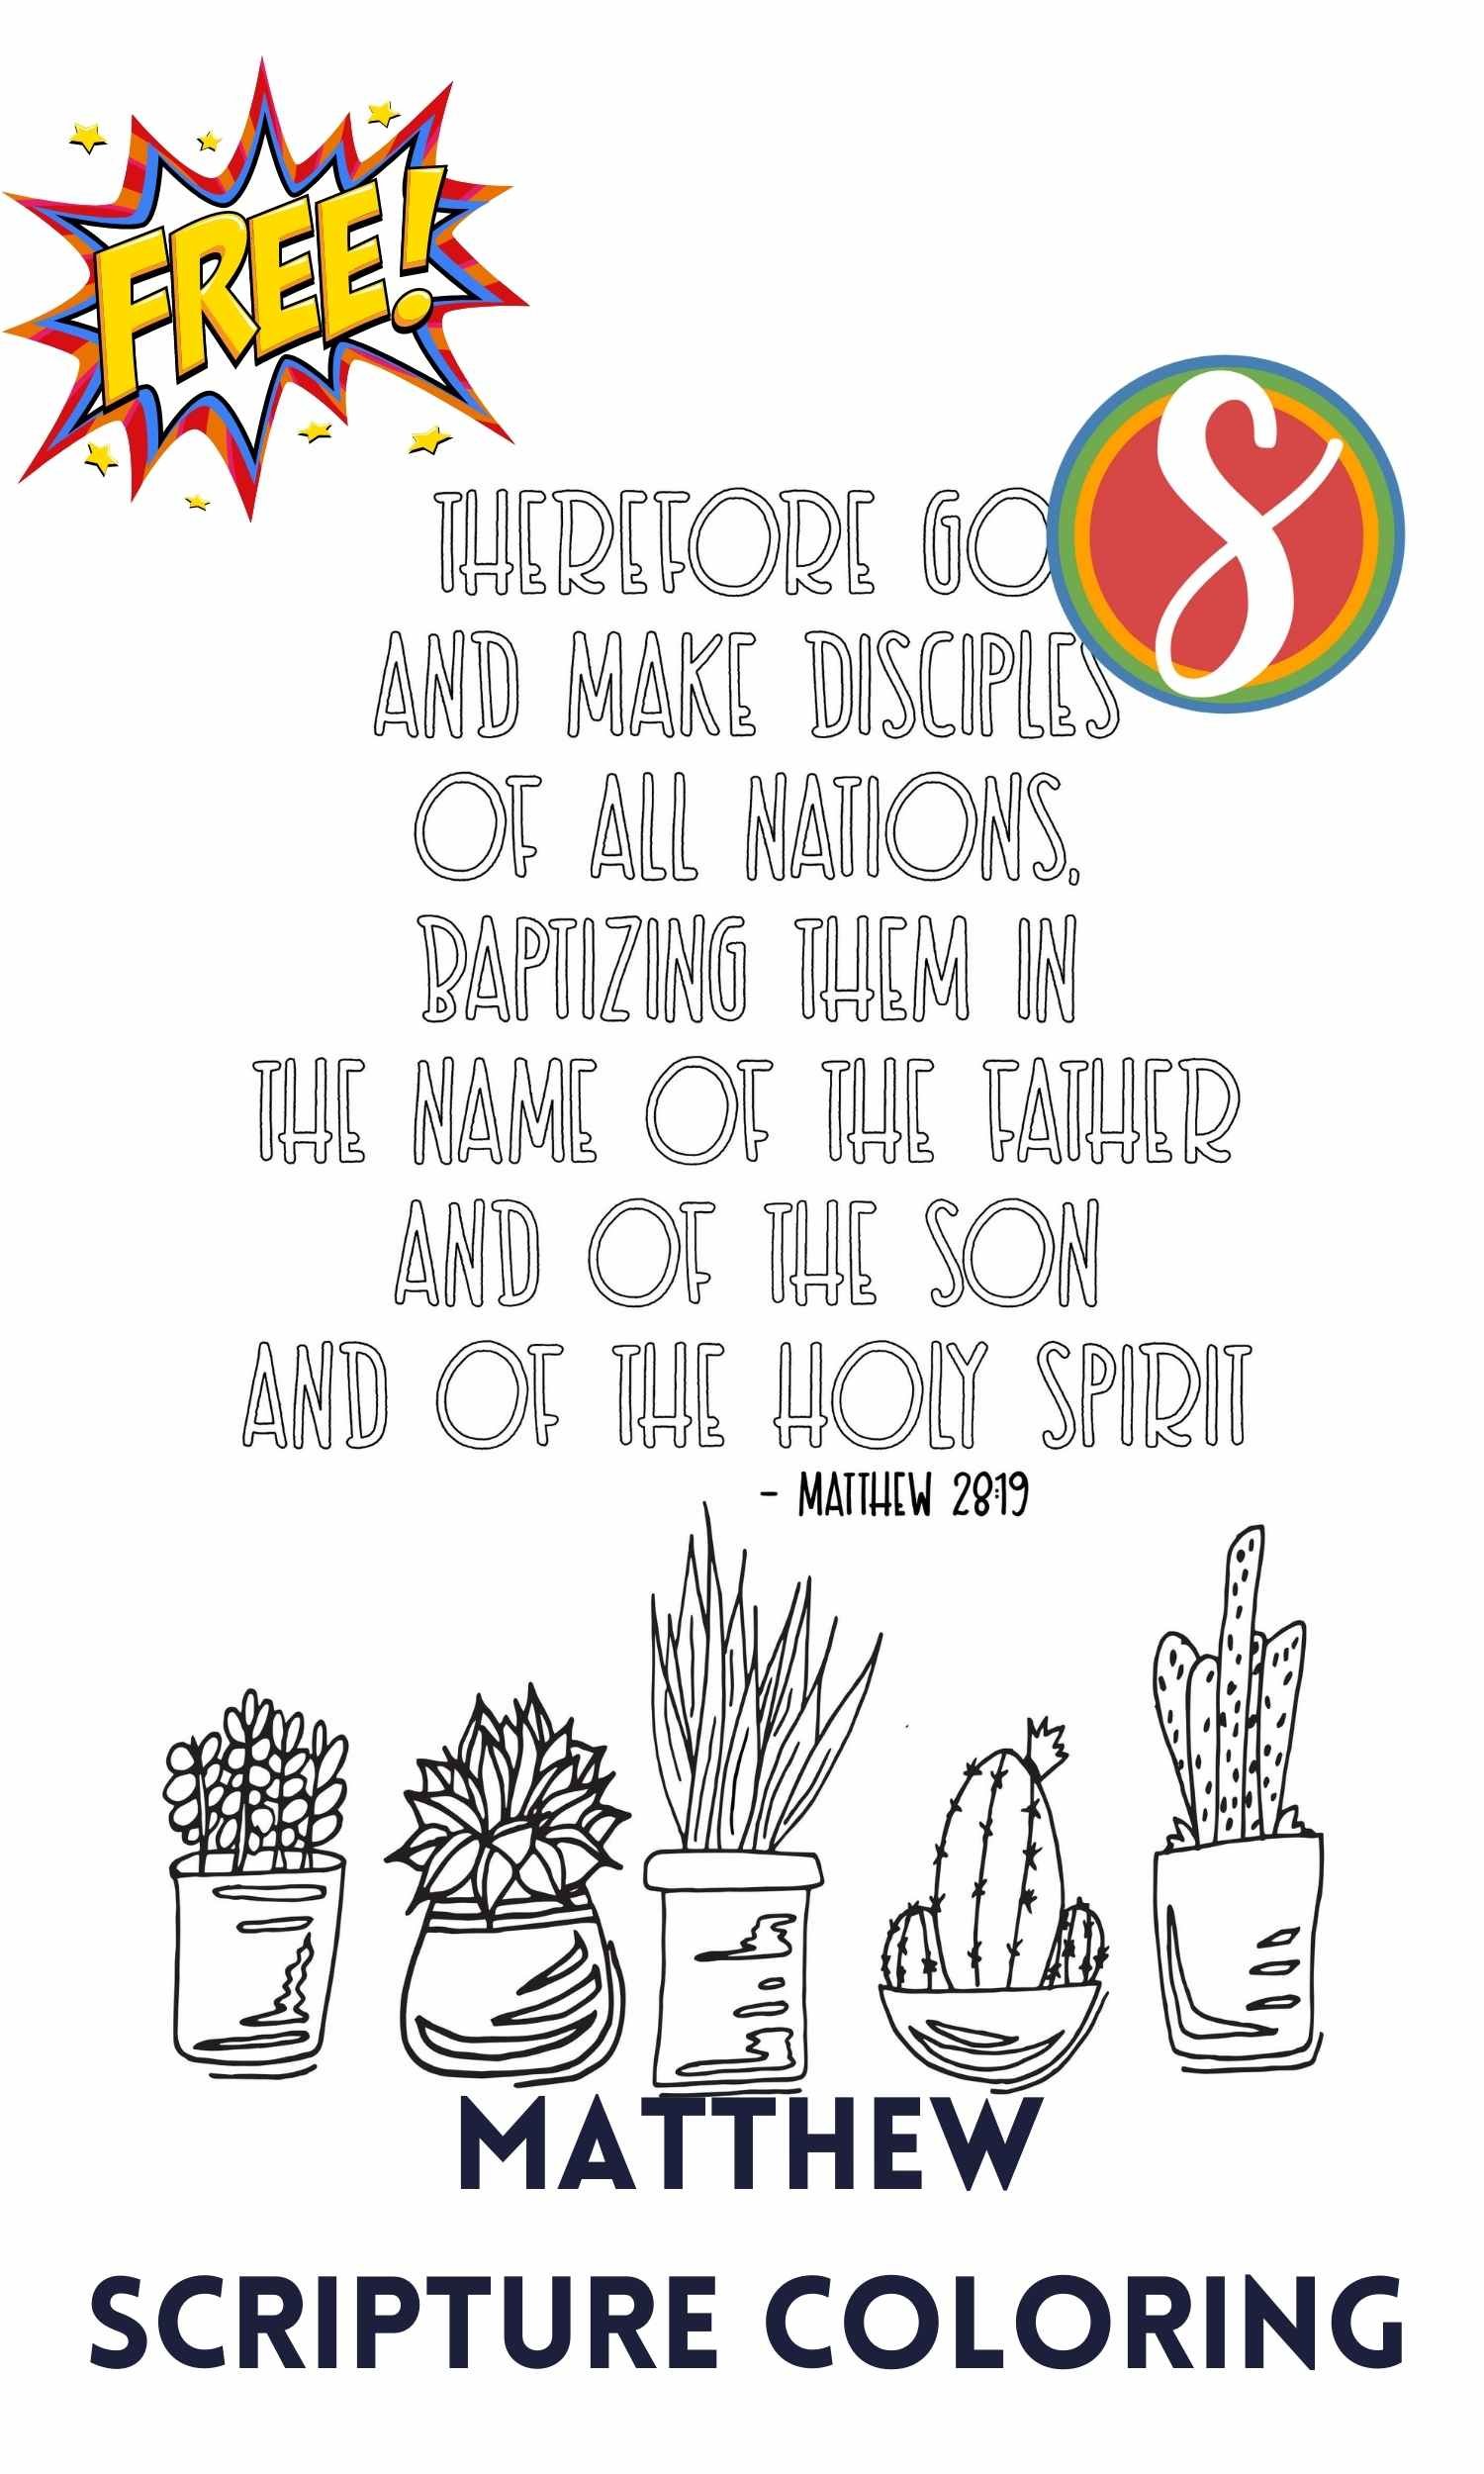 a line of 5 potted succulents to color and colorable text "Therefore go and make disciples of all nations, baptizing them in the name of the Father and of the son and of the Holy Spirit"